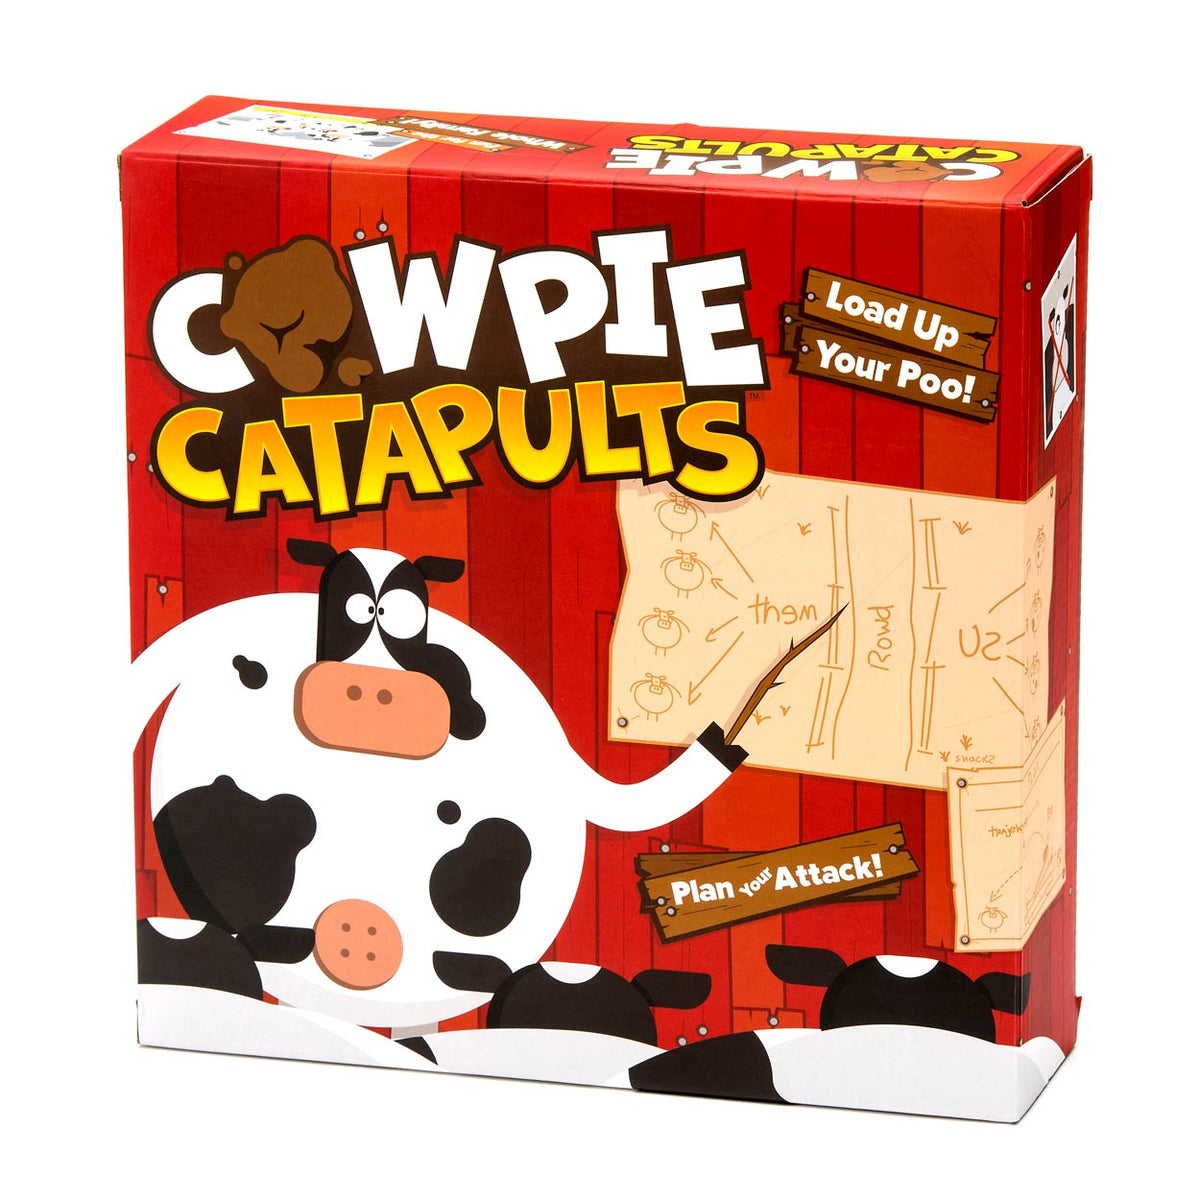 Cow Pie Catapults Cover